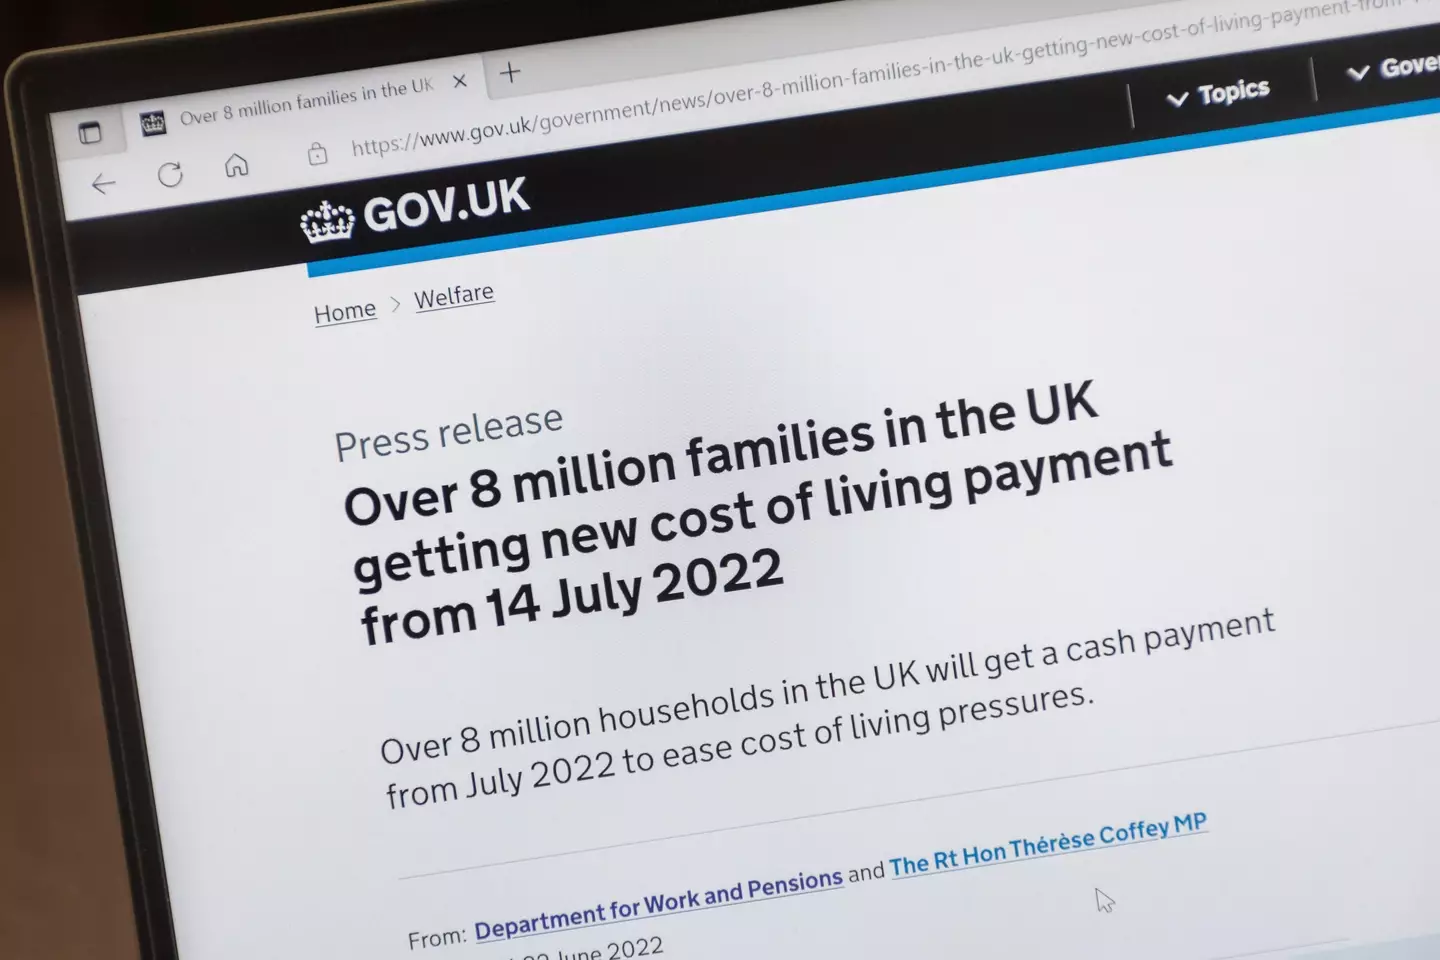 The first instalment of a £650 payment to help with the cost of living is arriving tomorrow for millions of households.